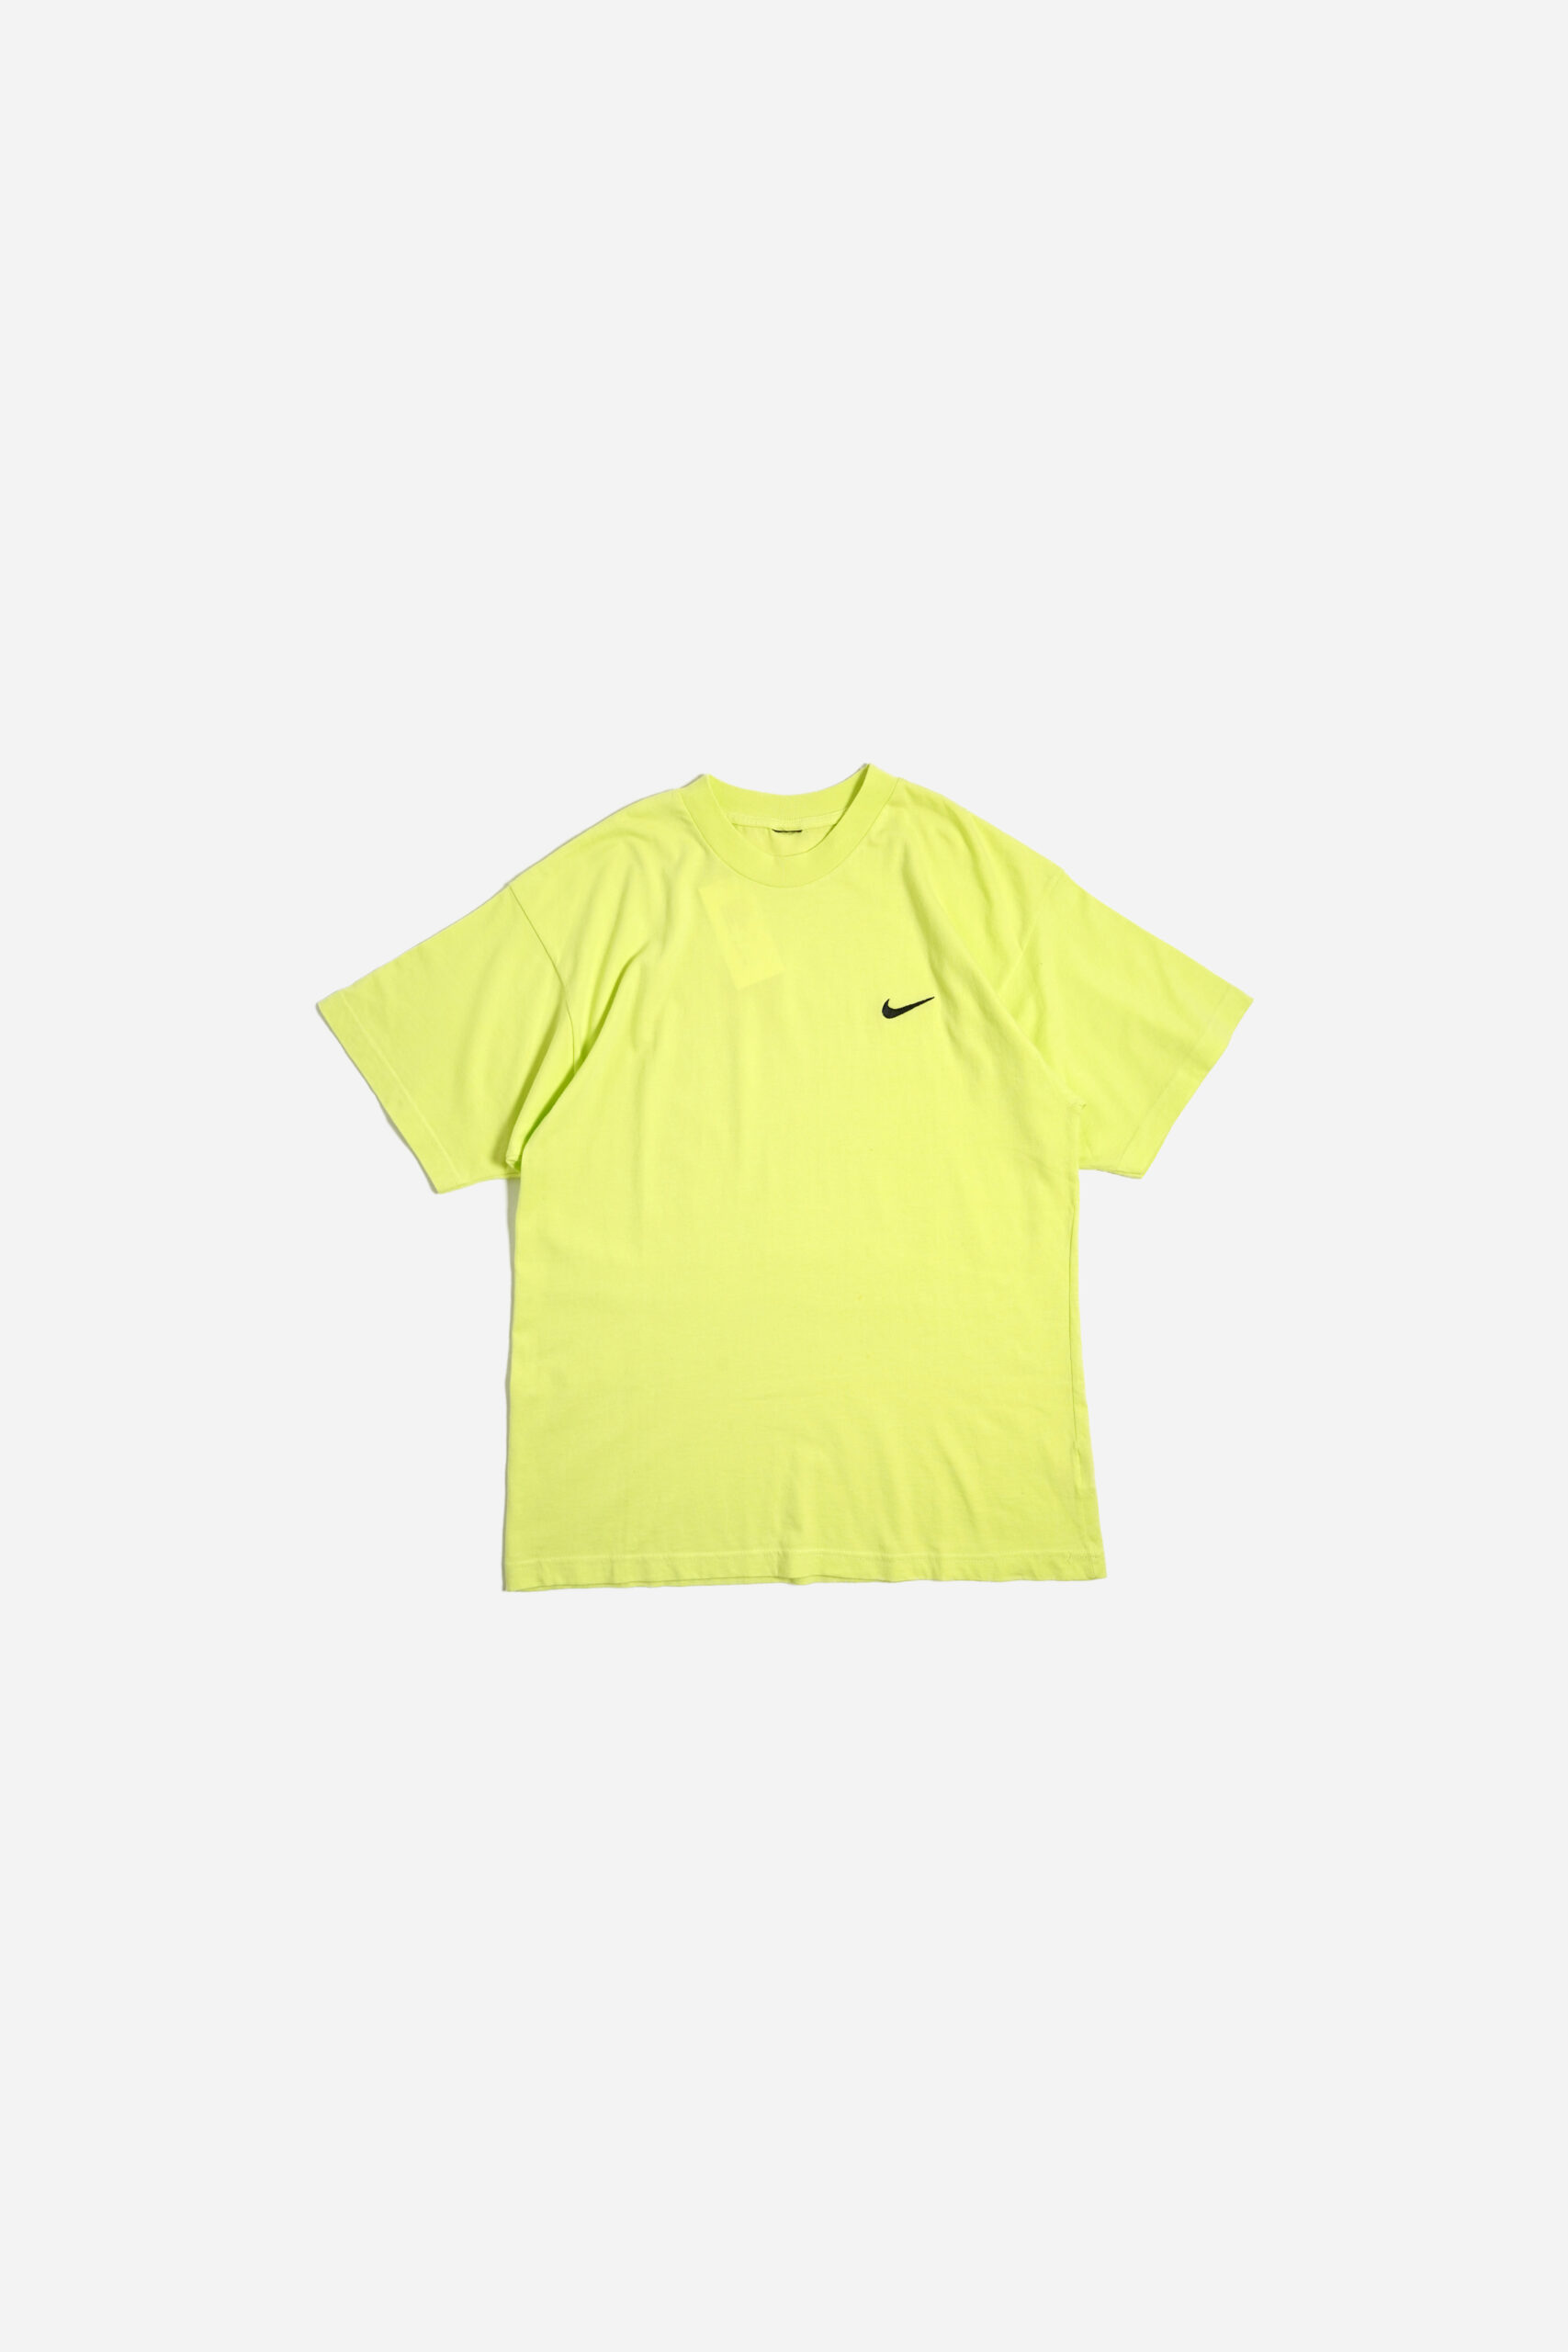 00'S NIKE FLUORESCENT COLOR TEE